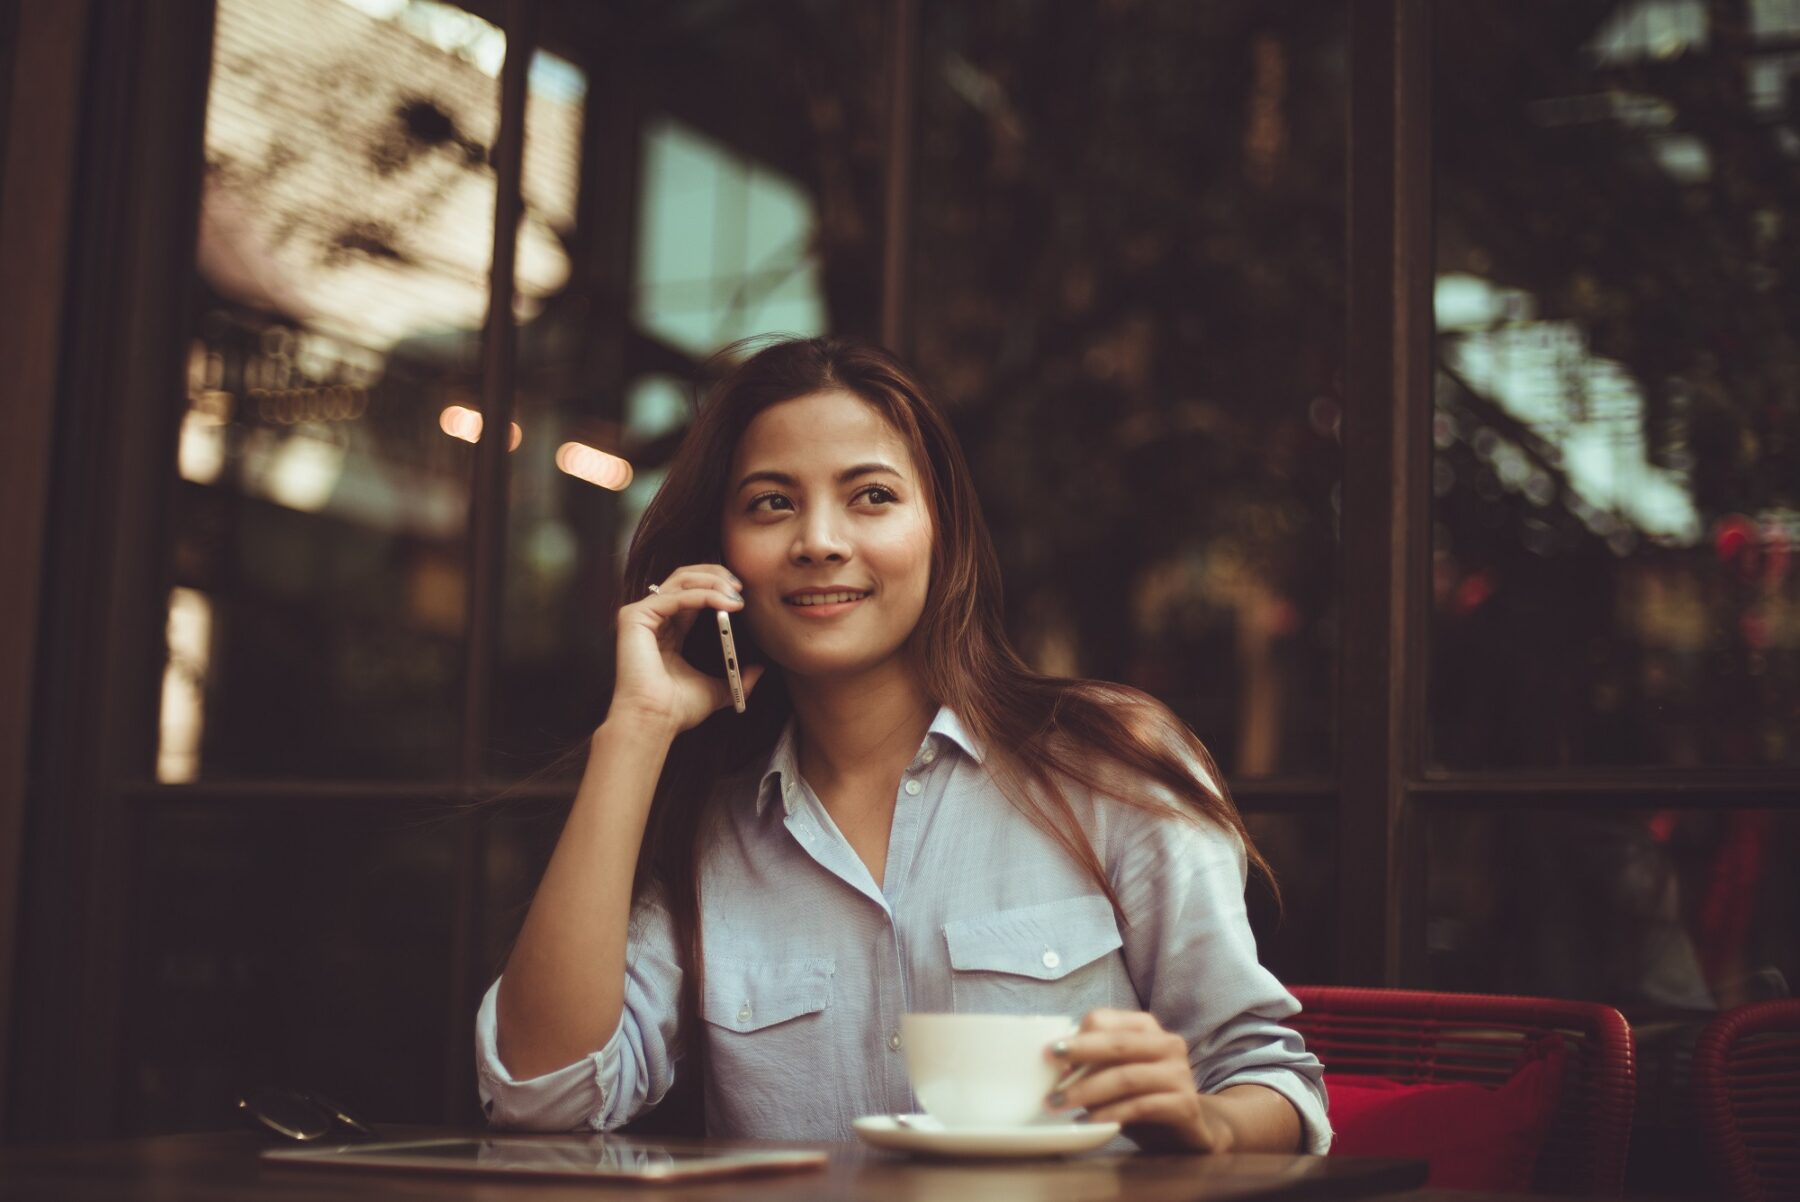 Woman sitting outside a cafe using a phone